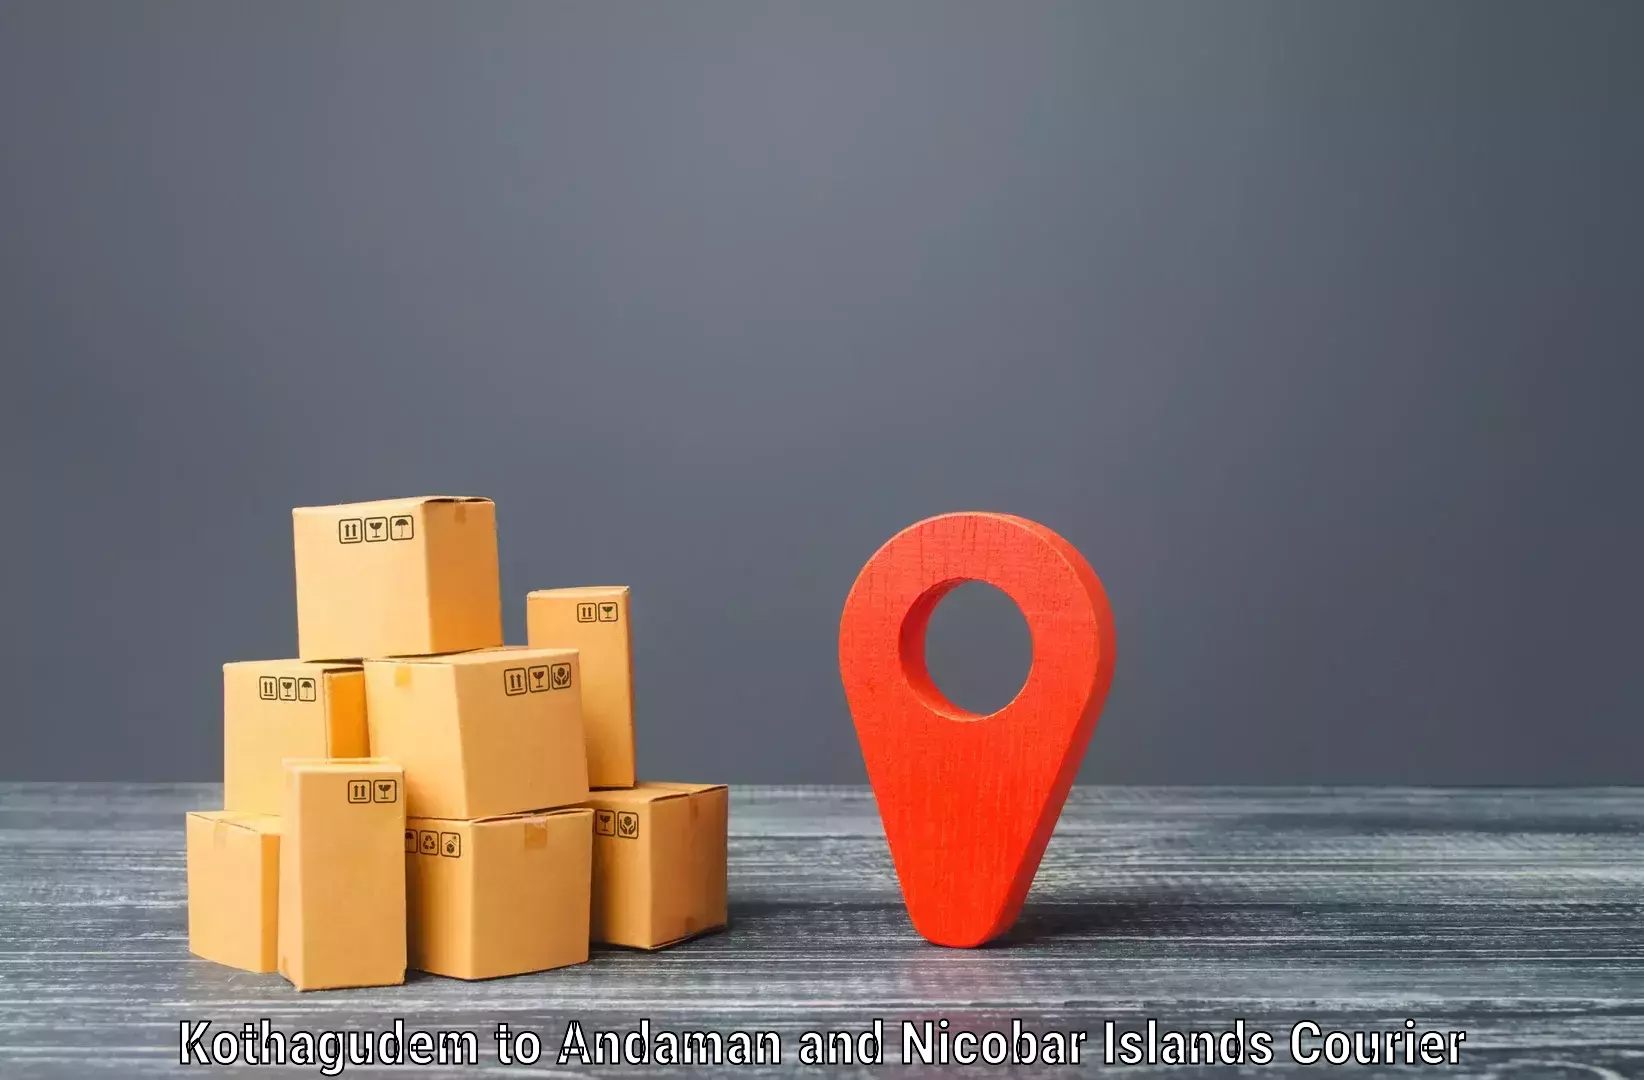 Round-the-clock parcel delivery Kothagudem to Andaman and Nicobar Islands